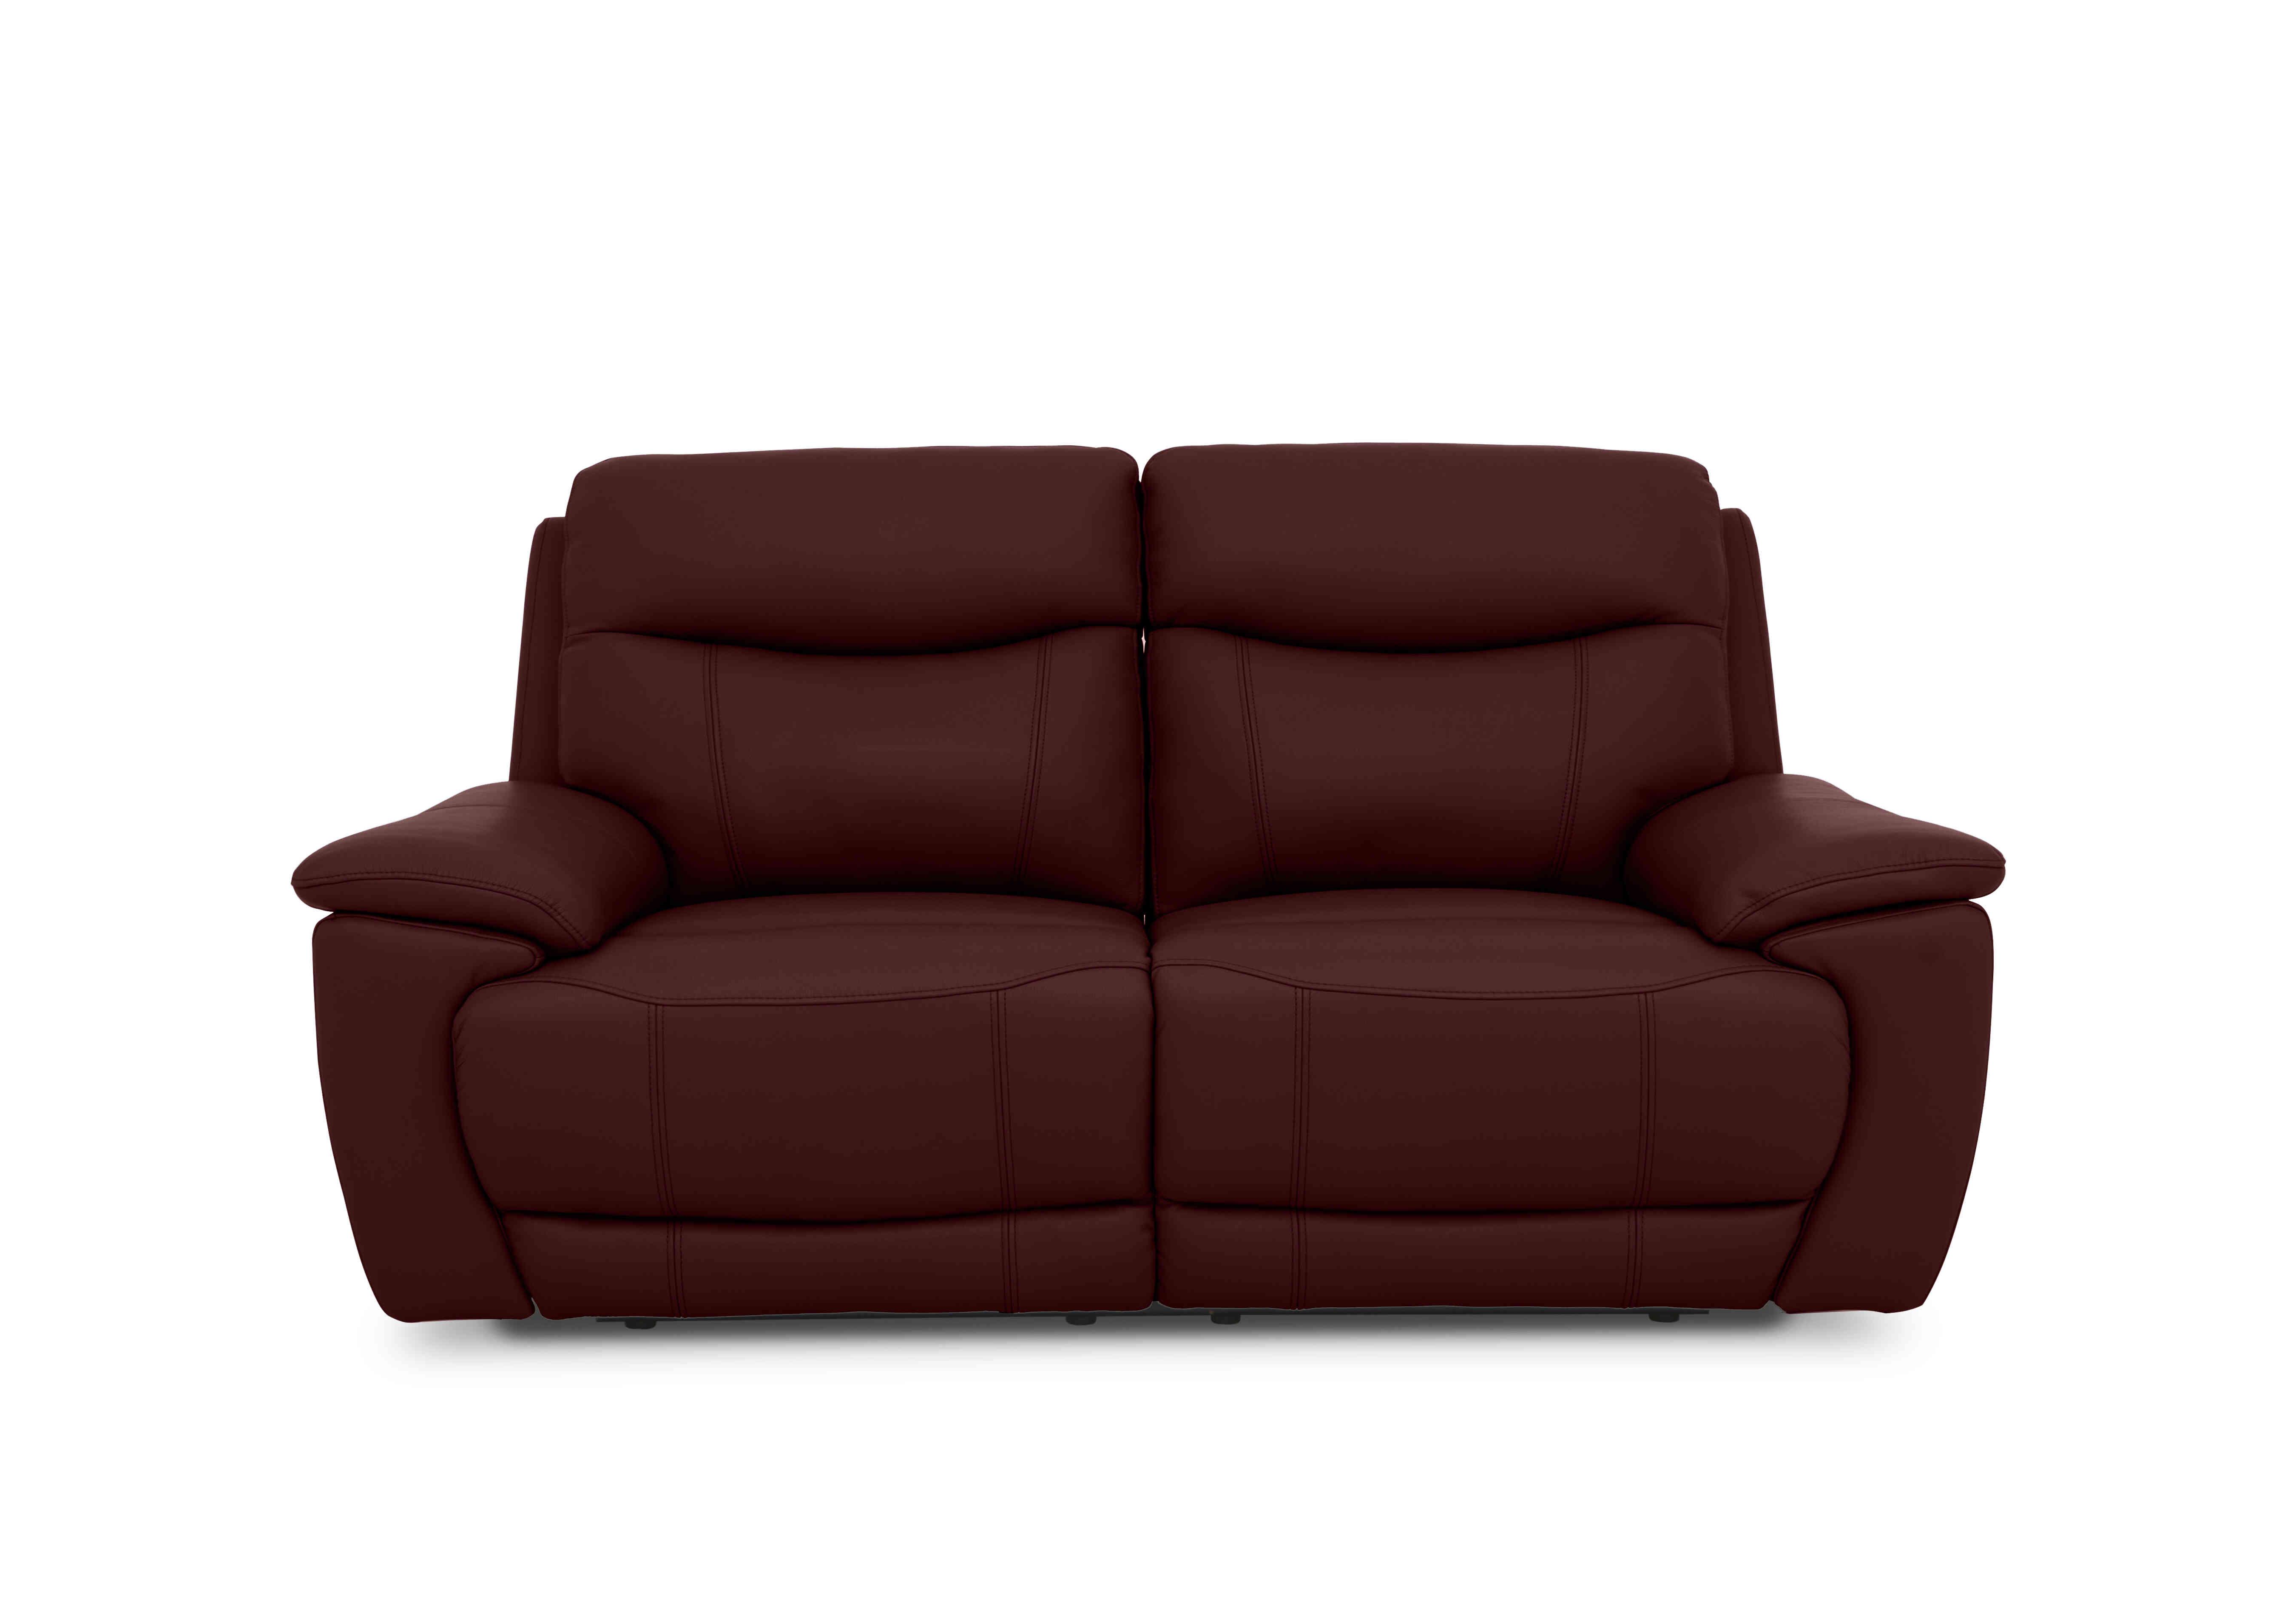 Sloane 3 Seater Leather Sofa in Cat-60/15 Ruby on Furniture Village